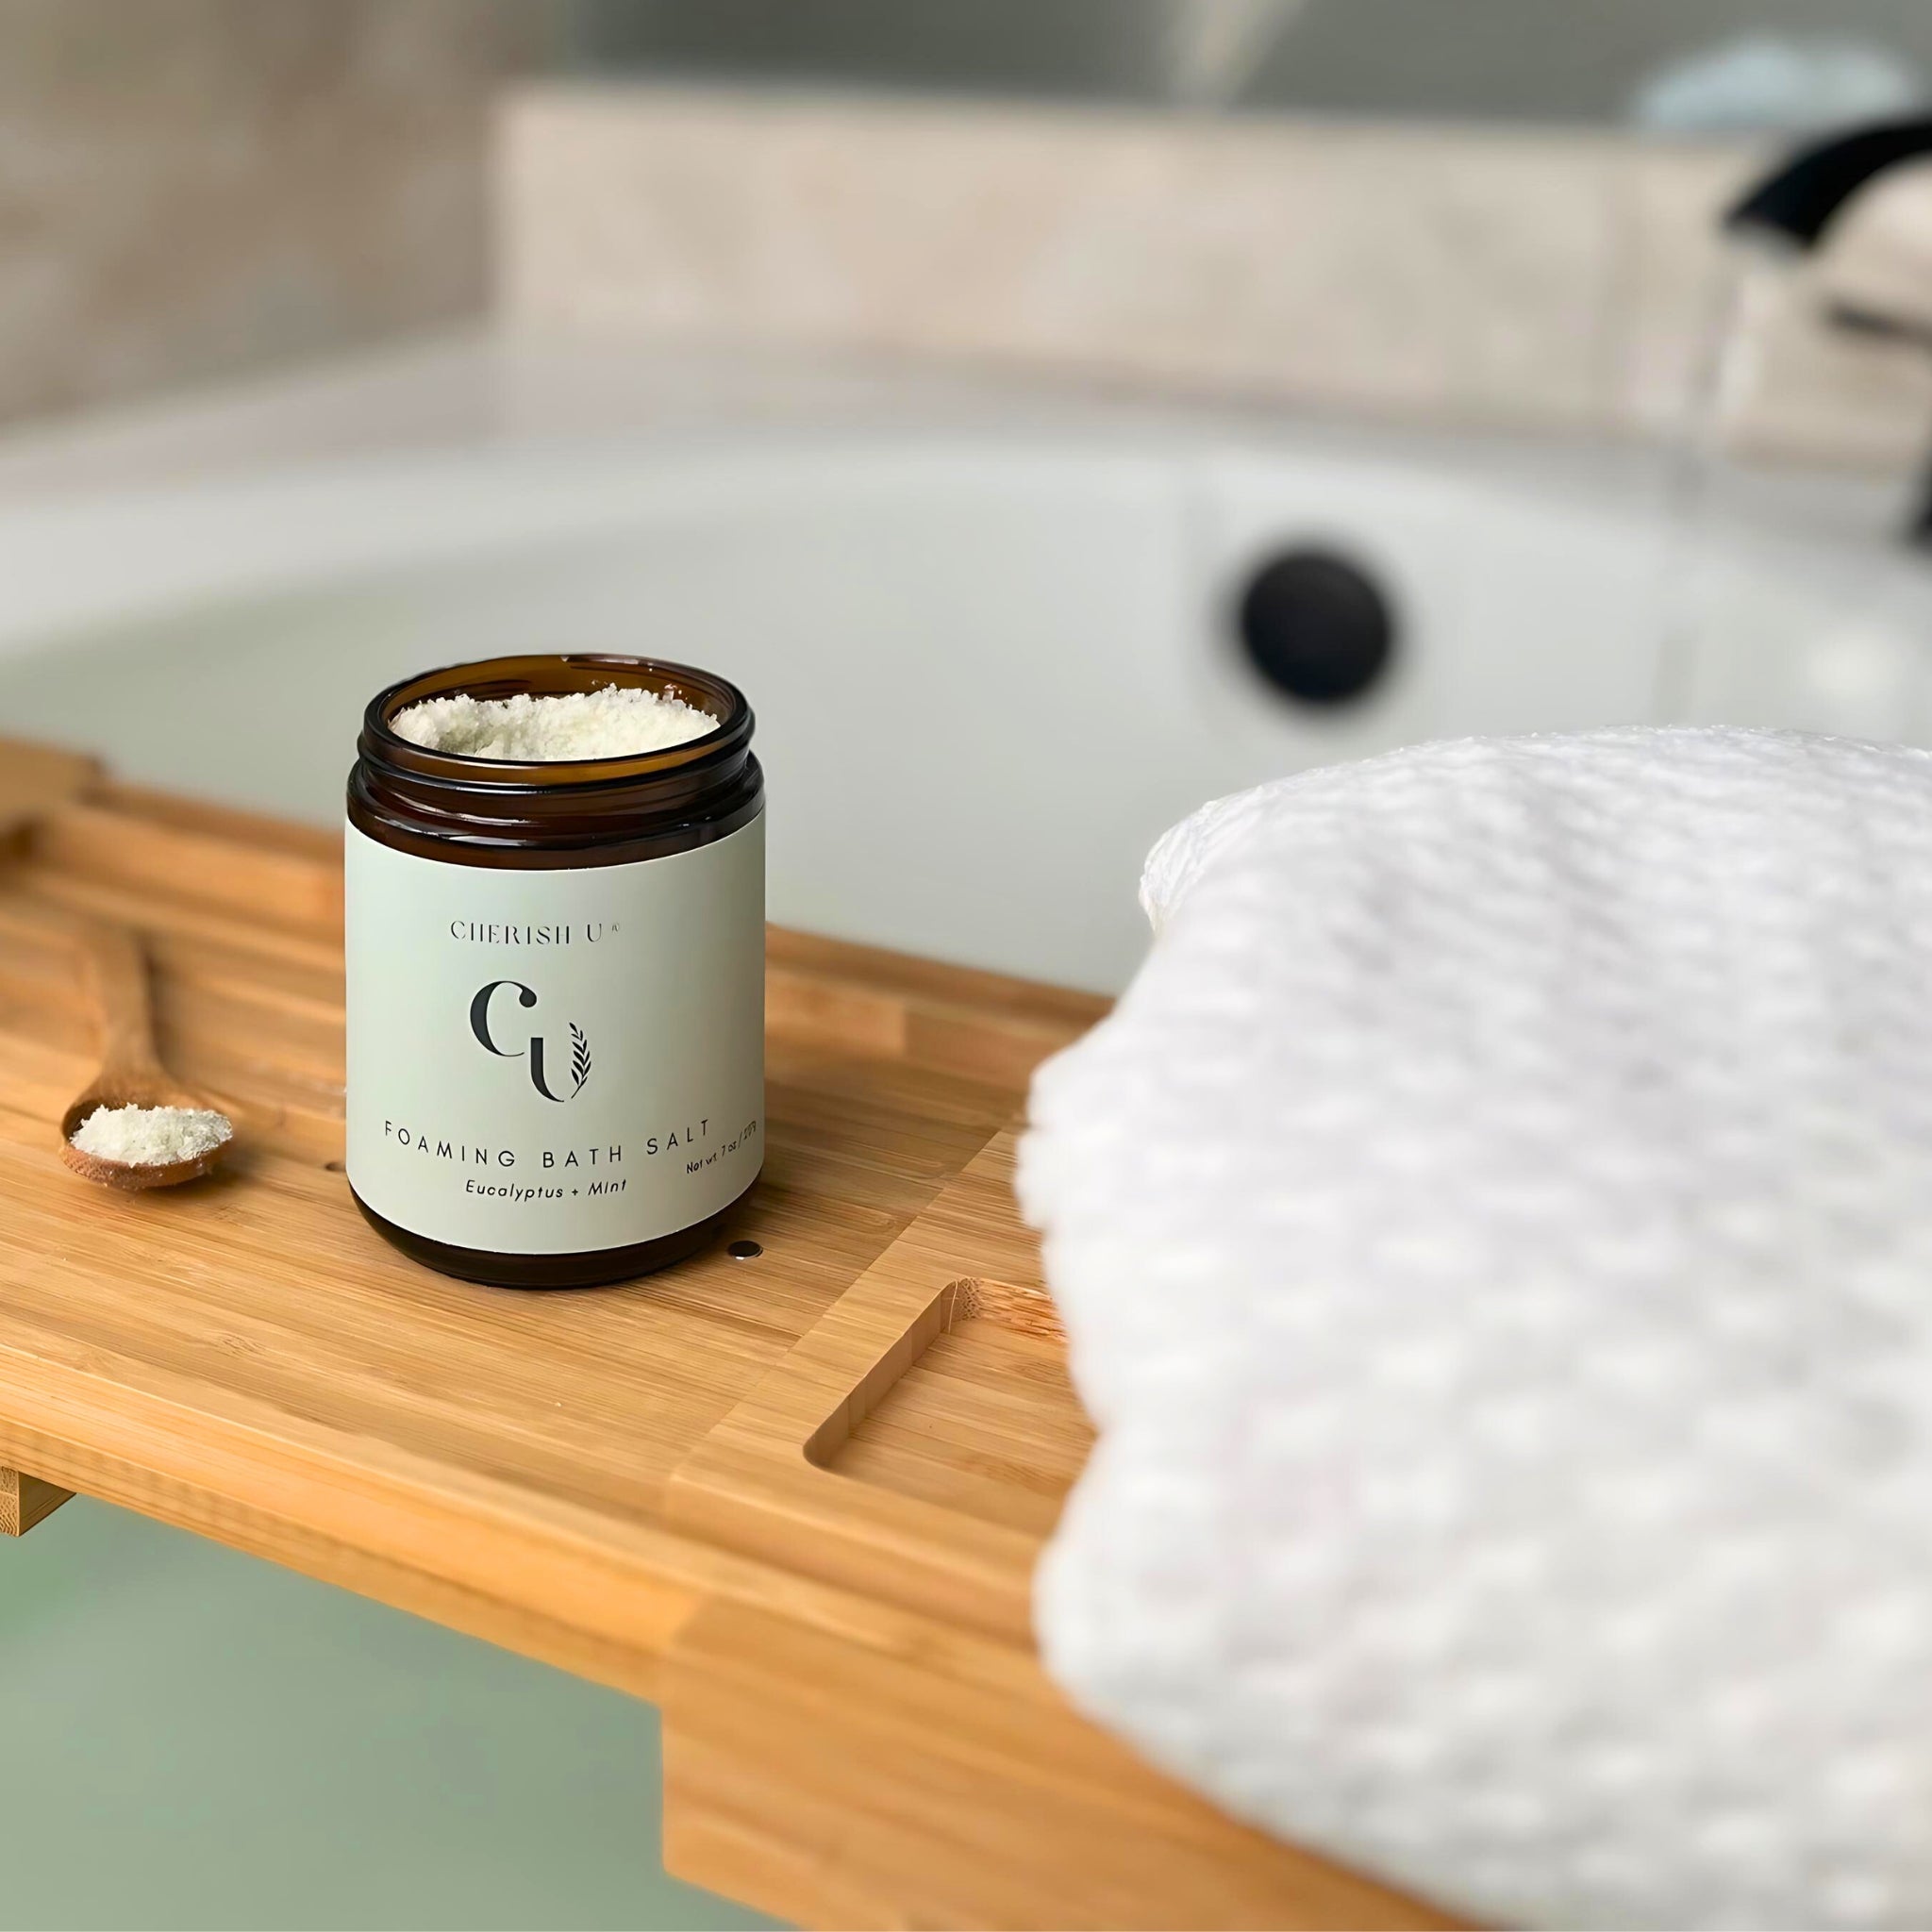 A jar of Eucalyptus foaming bath salts is placed stylishly on a wooden bathtub tray. The sound of running water in the background adds to the refreshing and invigorating scene